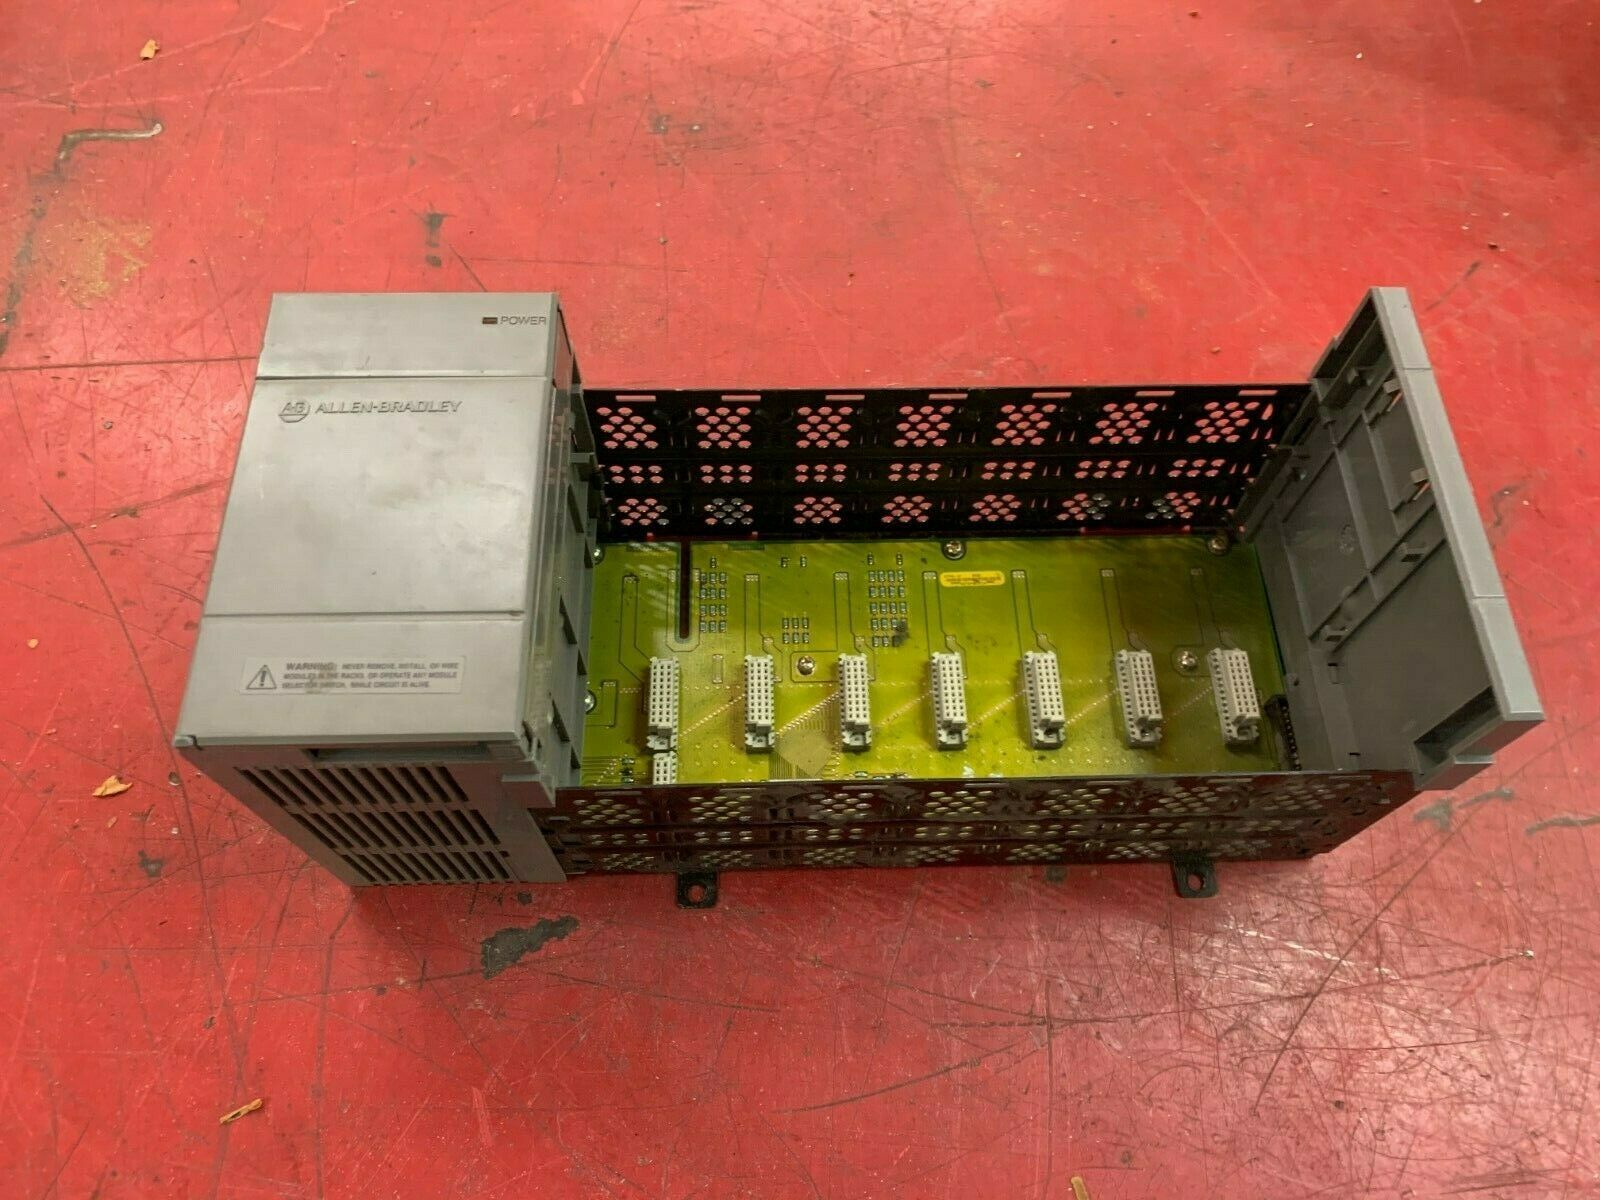 USED ALLEN-BRADLEY SLC 500 POWER SUPPLY 1746-P2 WITH 7-SLOT RACK 1746-A7